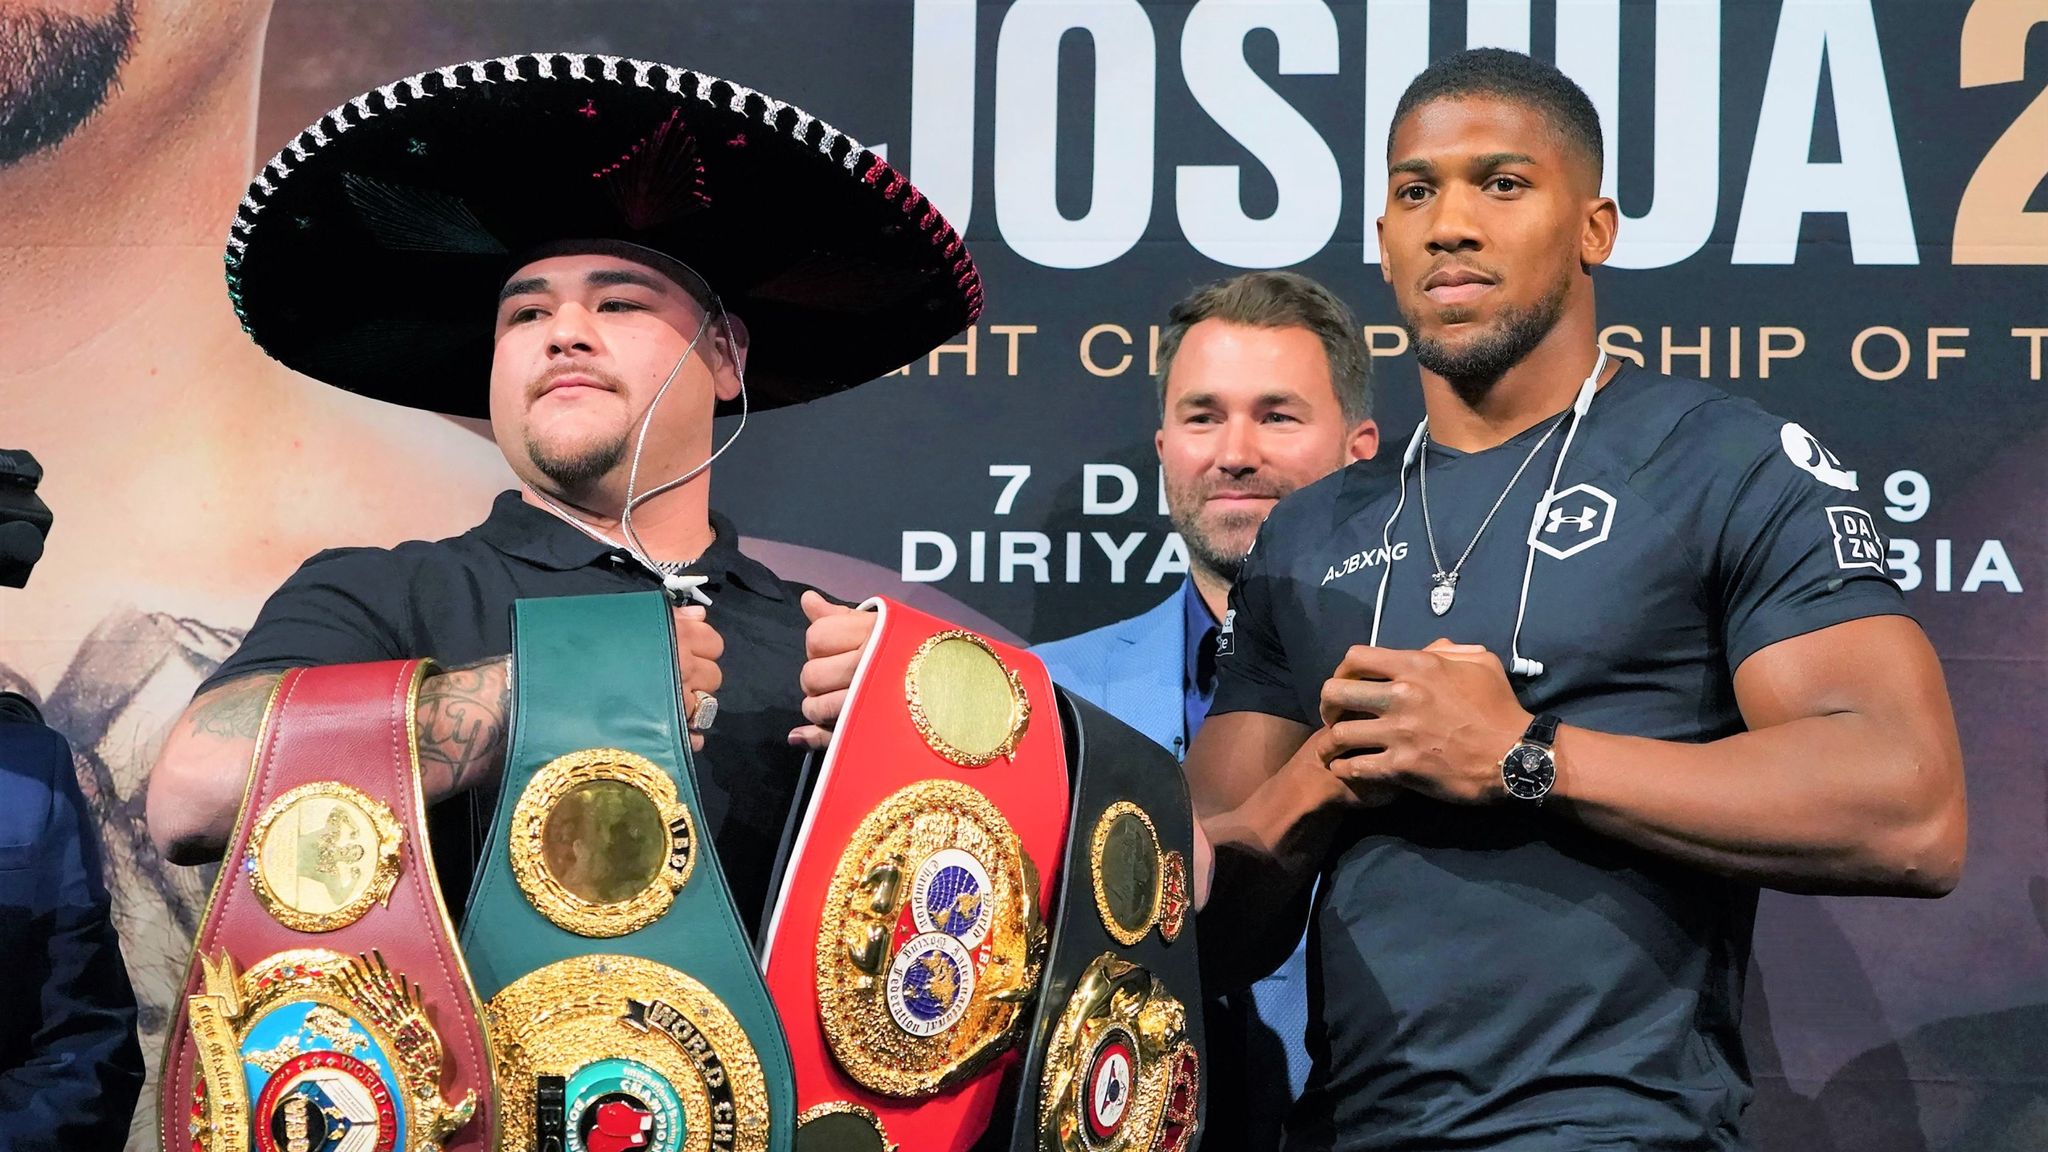 Ruiz Jr vs Joshua 2 What time is Anthony Joshua in the ring? Boxing News Sky Sports